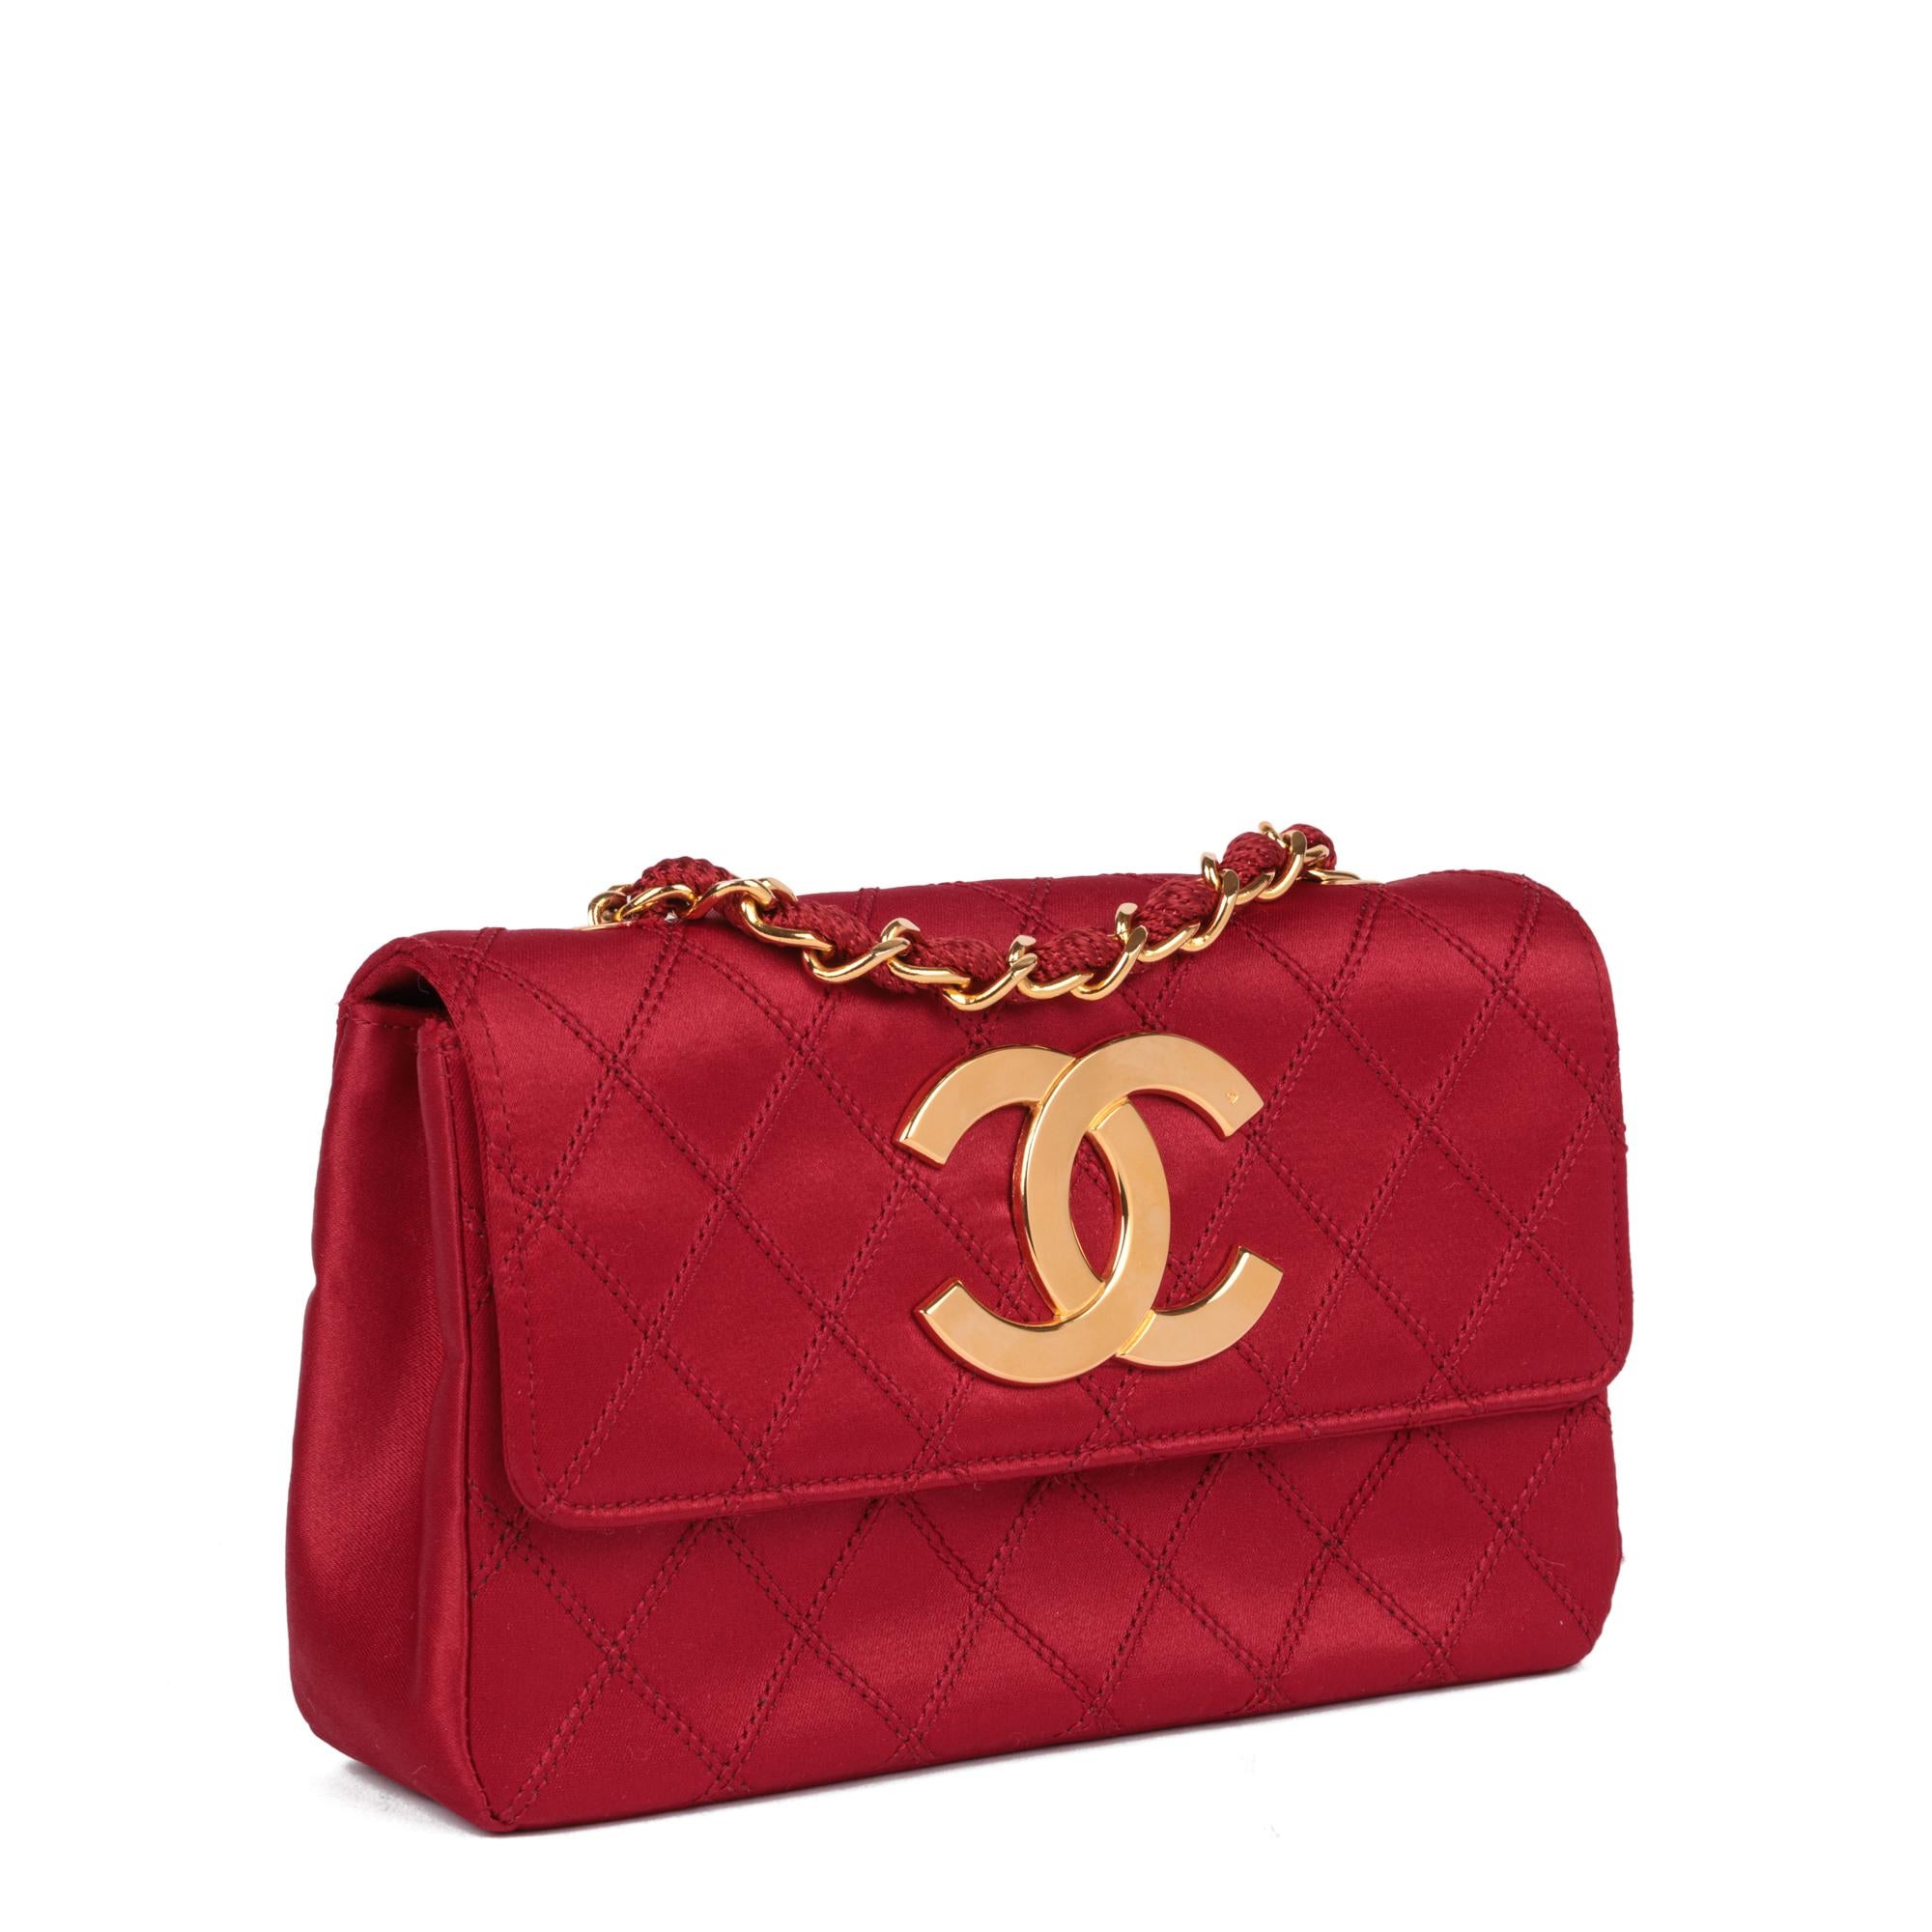 CHANEL
Red Quilted Satin Vintage XL Rectangular Mini Flap Bag

Serial Number: 0731647
Age (Circa): 1988
Accompanied By: Chanel Dust Bag, Authenticity Card, Care Booklet
Authenticity Details:  Authenticity Card, Serial Sticker (Made in